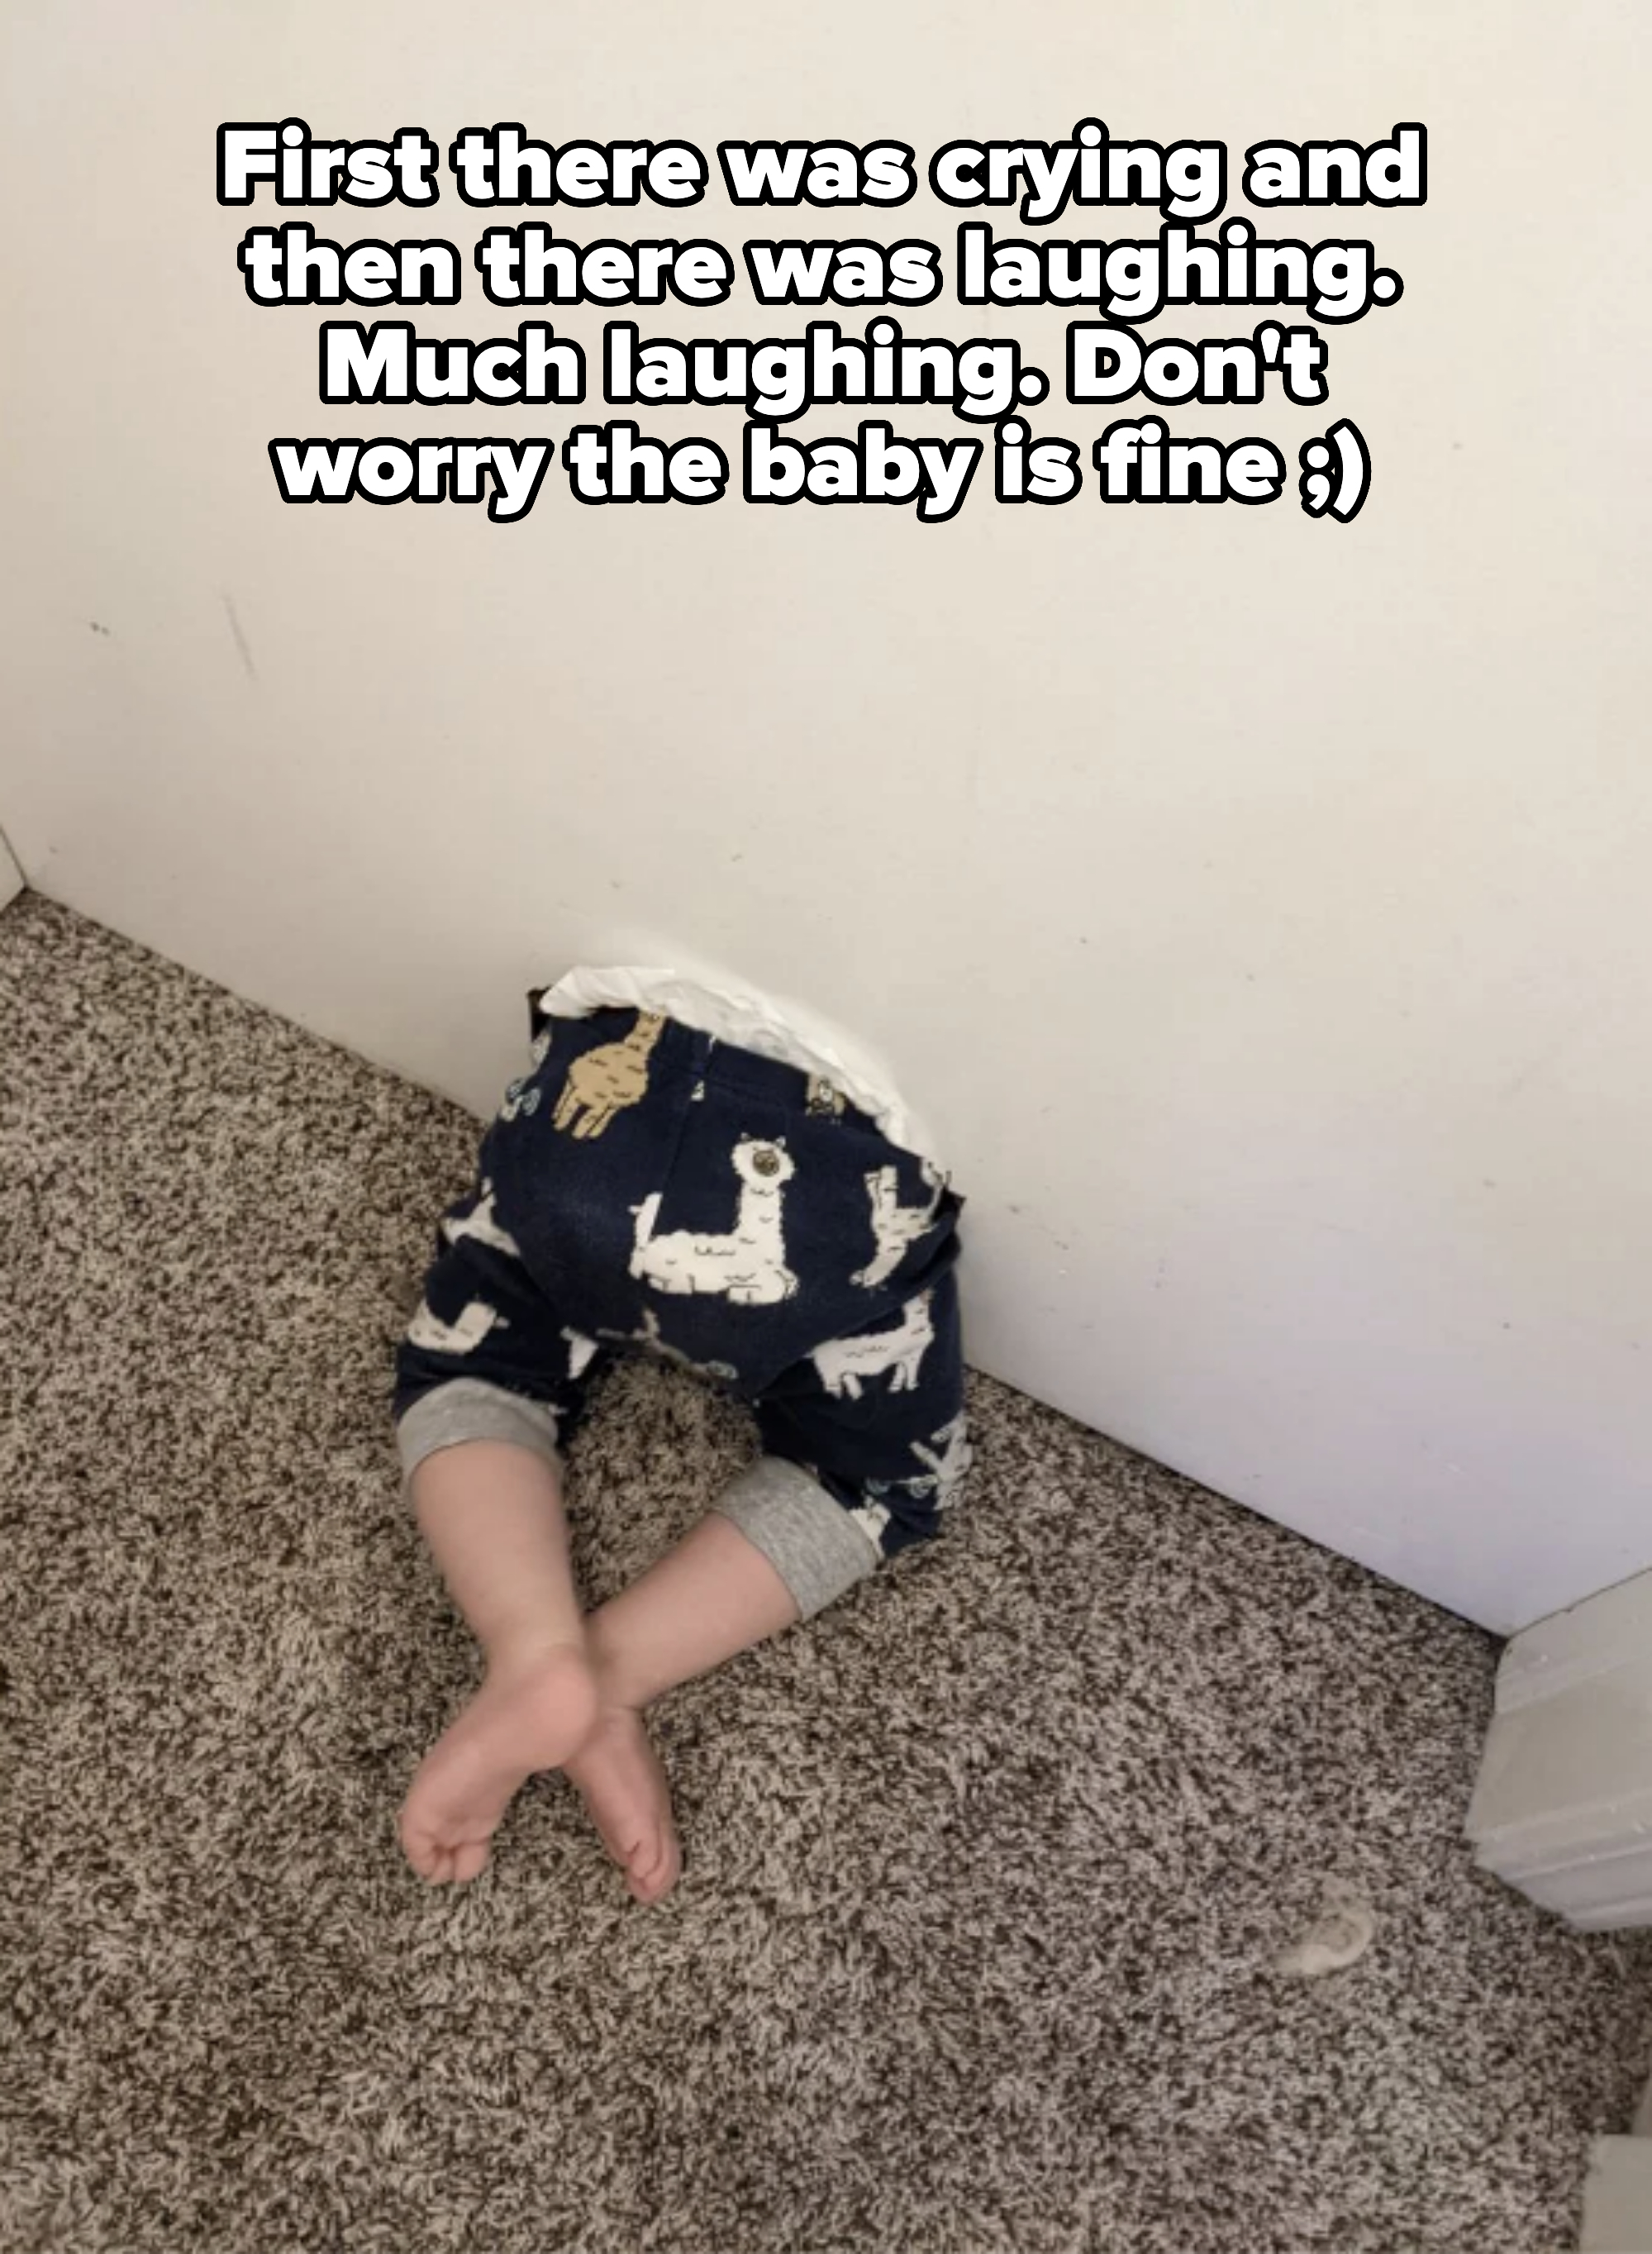 A baby wearing animal print pants and a white shirt is head down, with only legs visible, stuck in the corner against a wall and carpeted floor